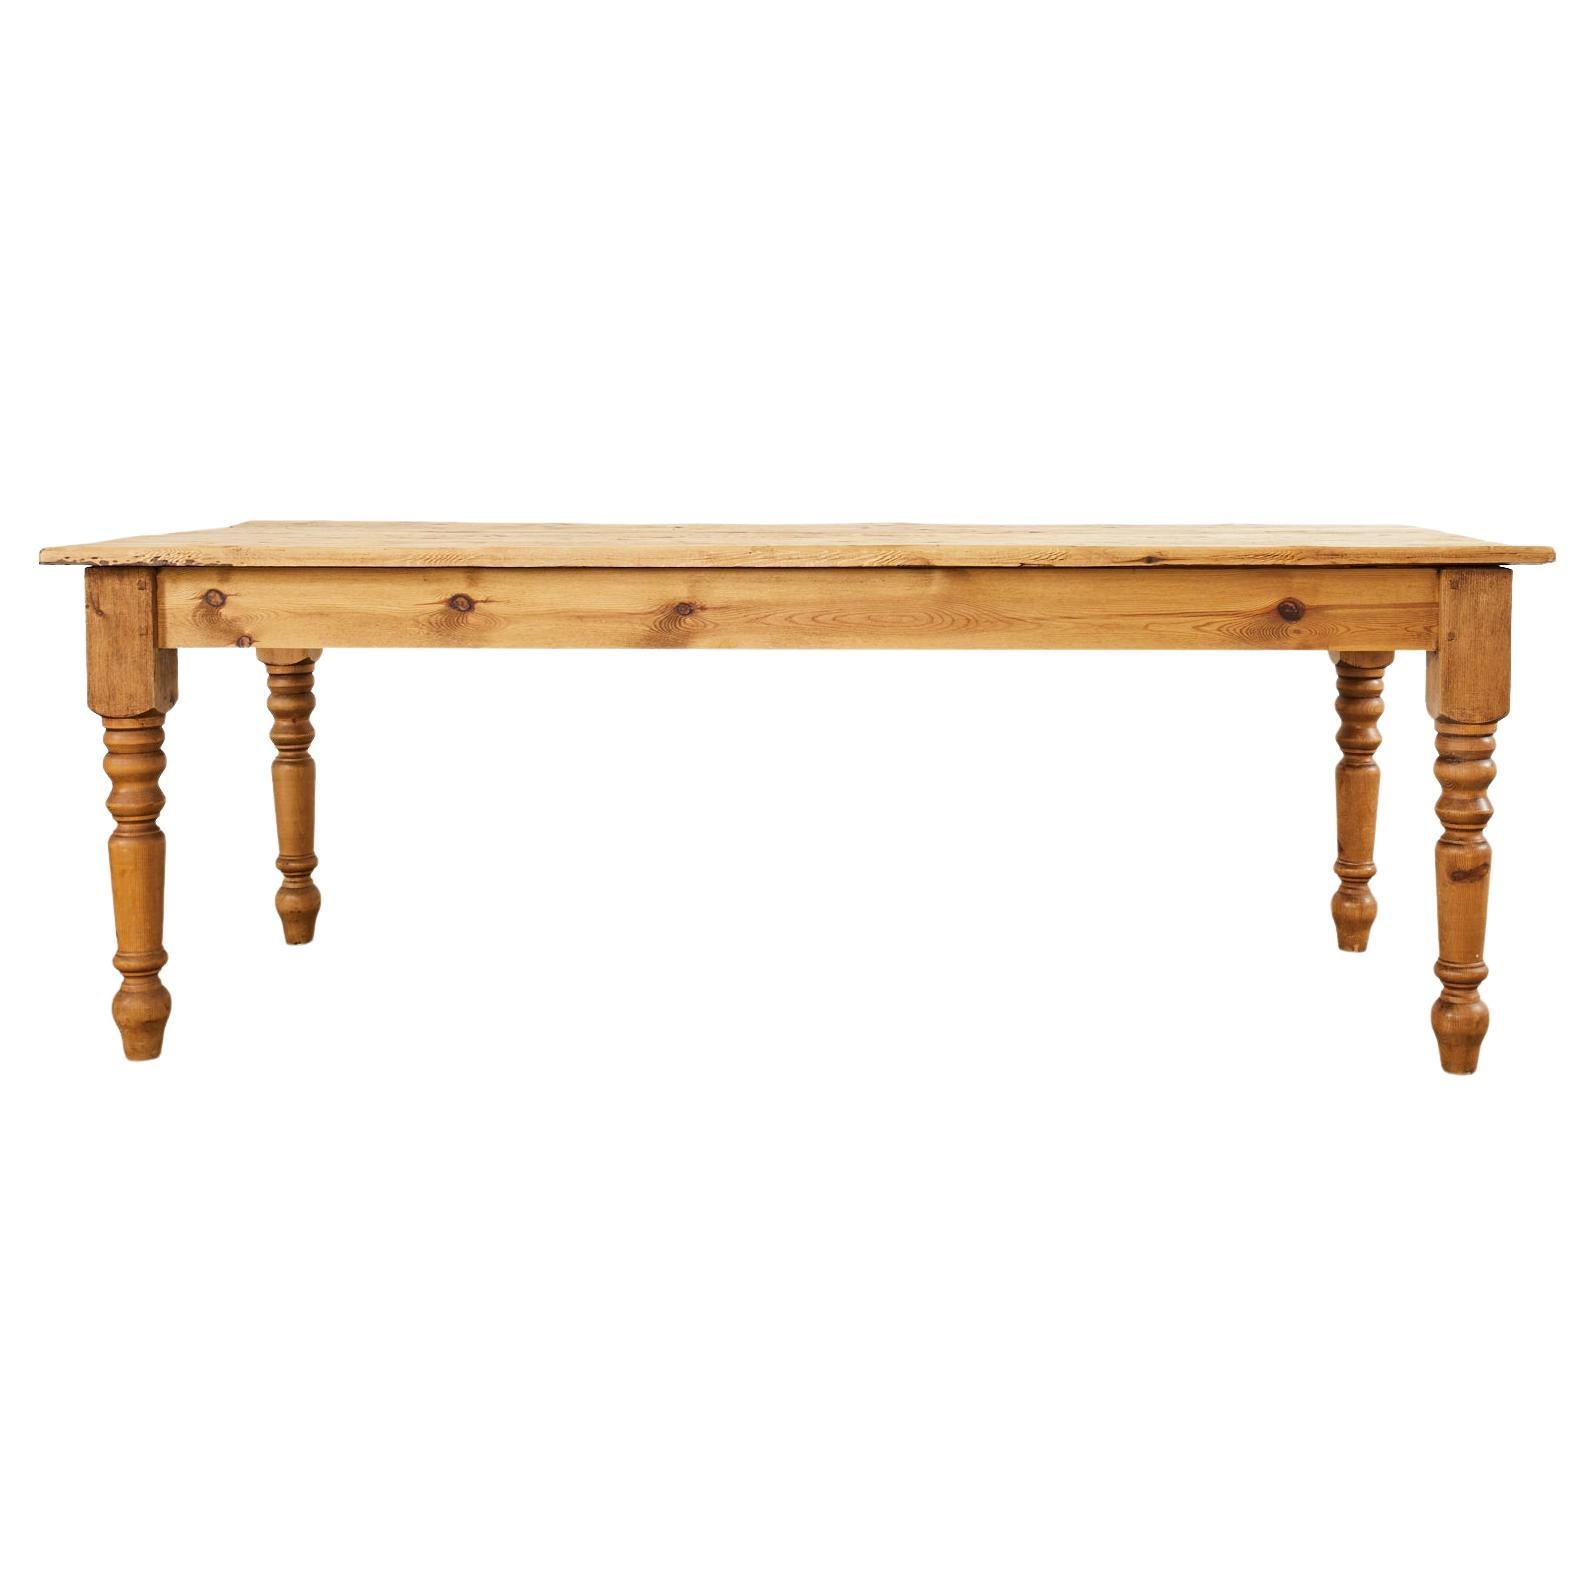 Country English Style Pine Farmhouse Dining Harvest Table